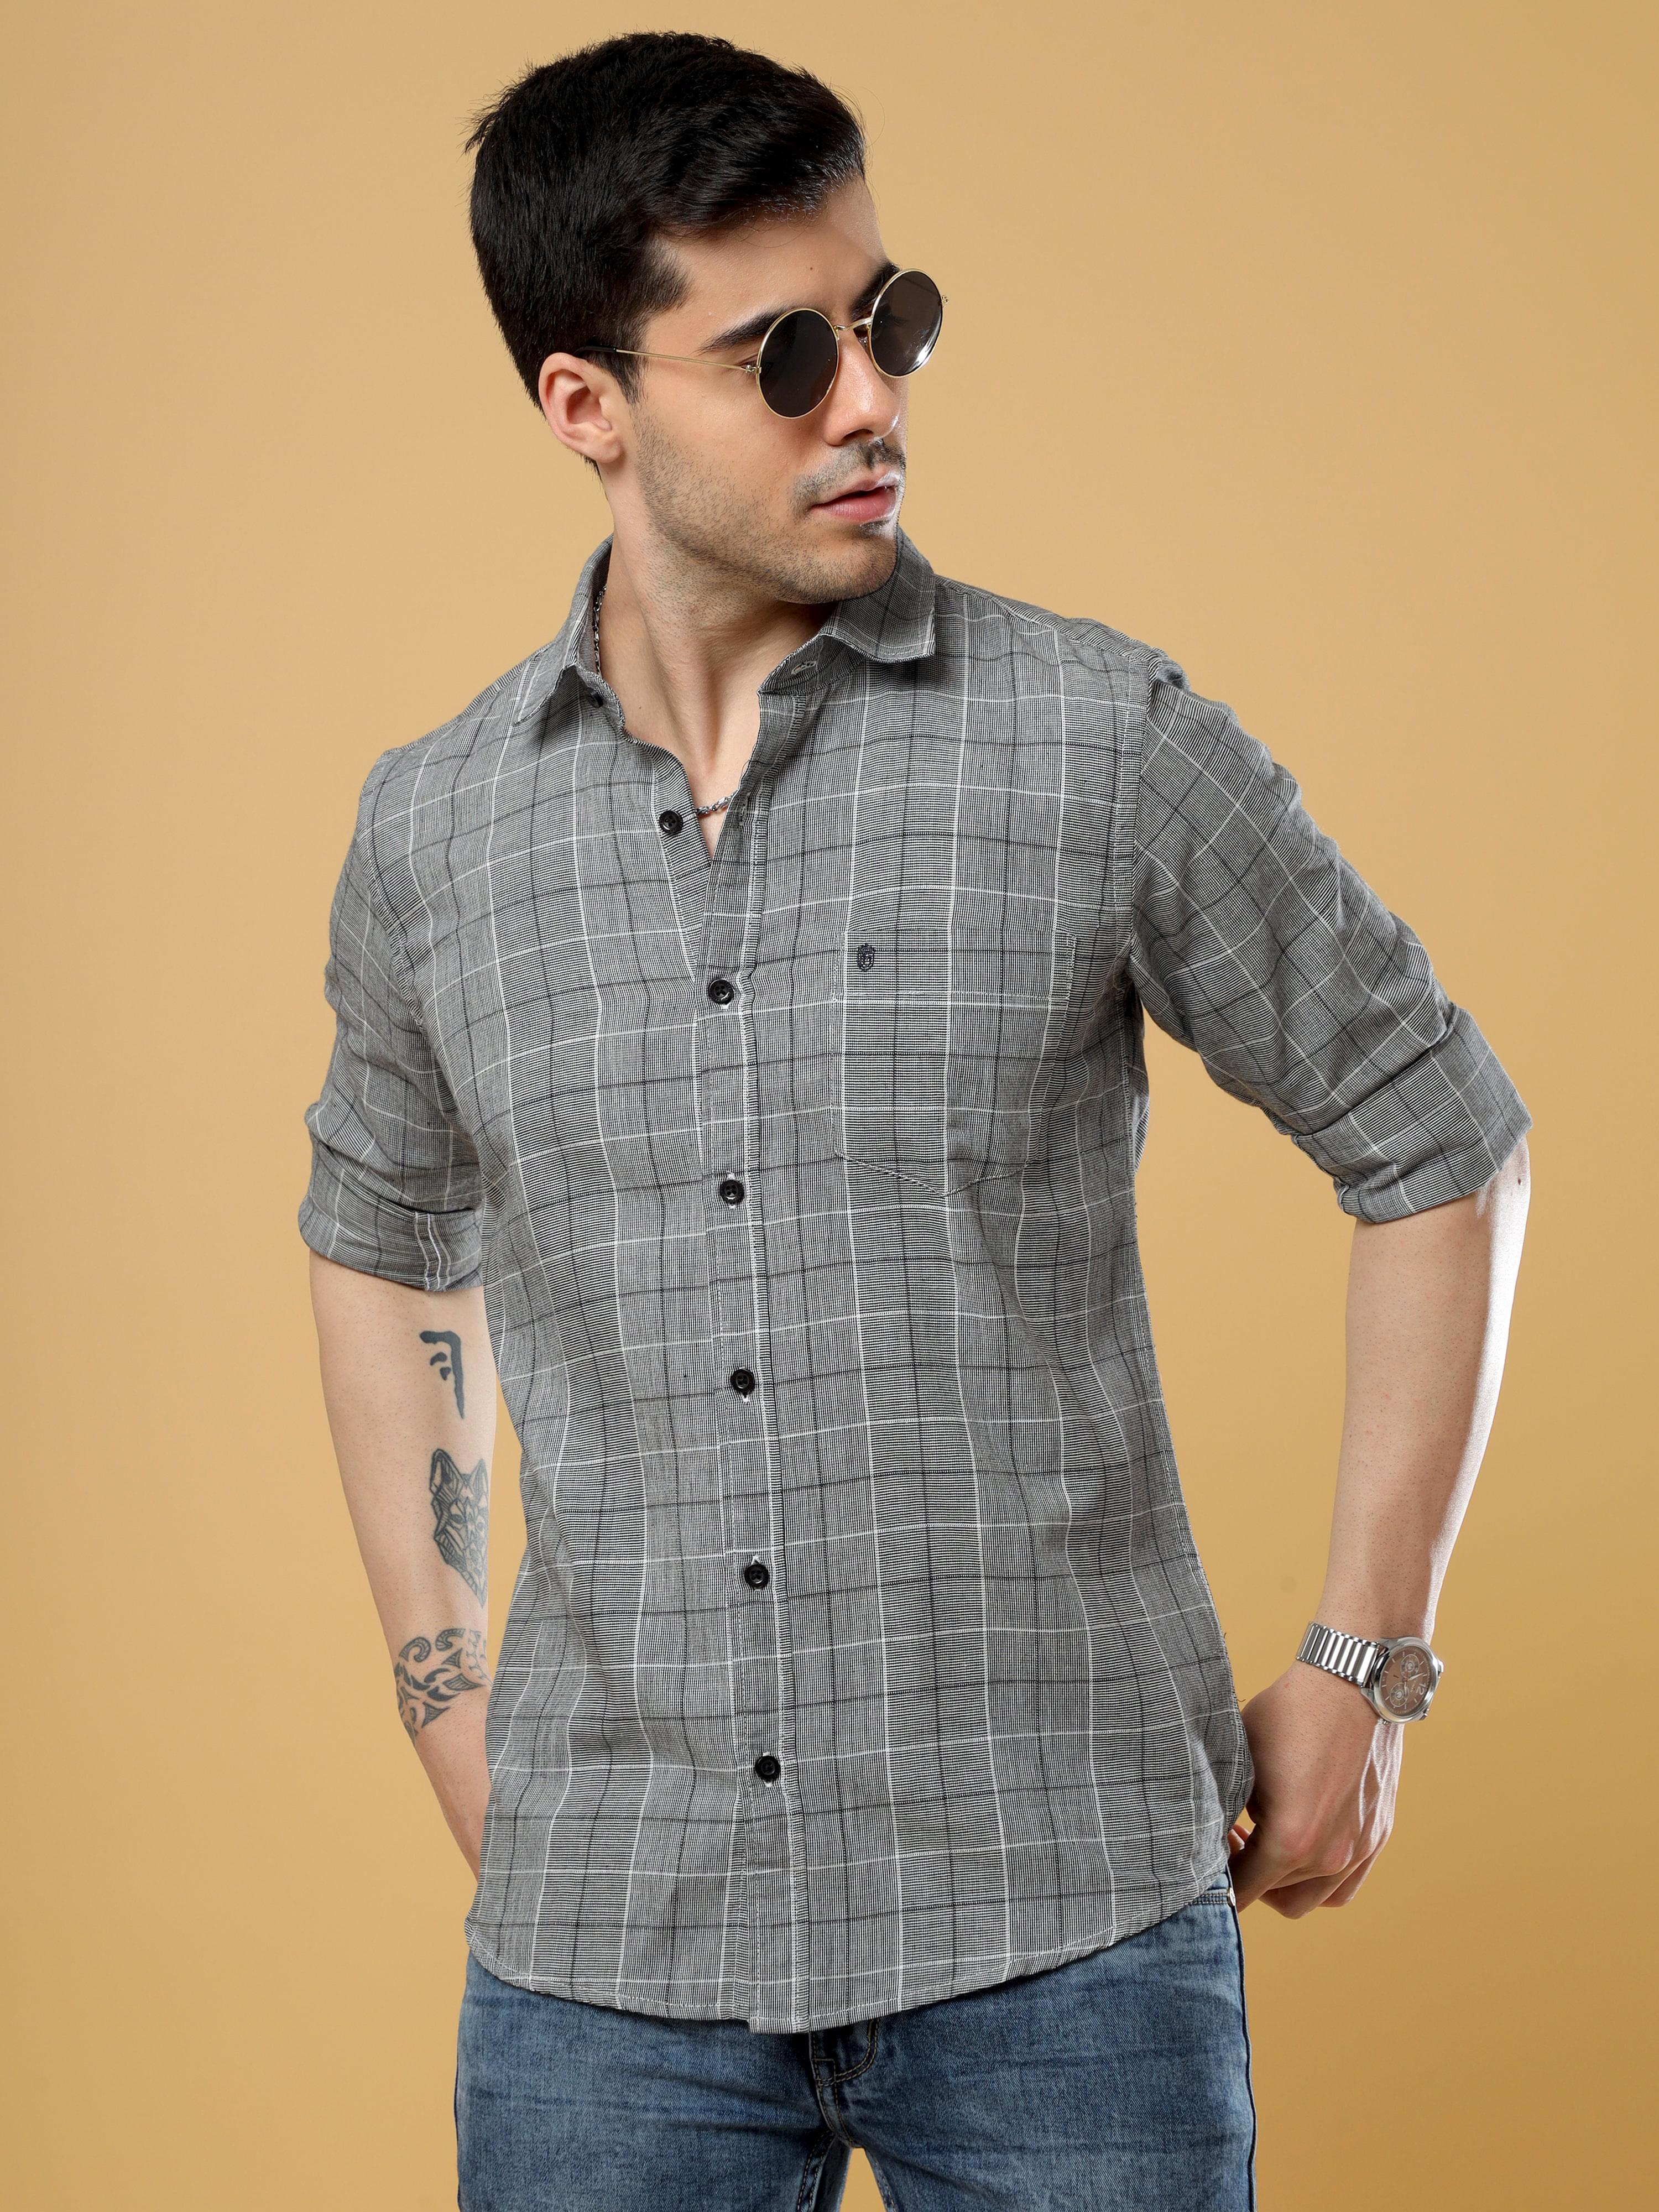 Buy Trendy Black And Grey Check Shirt Online In IndiaRs. 1299.00